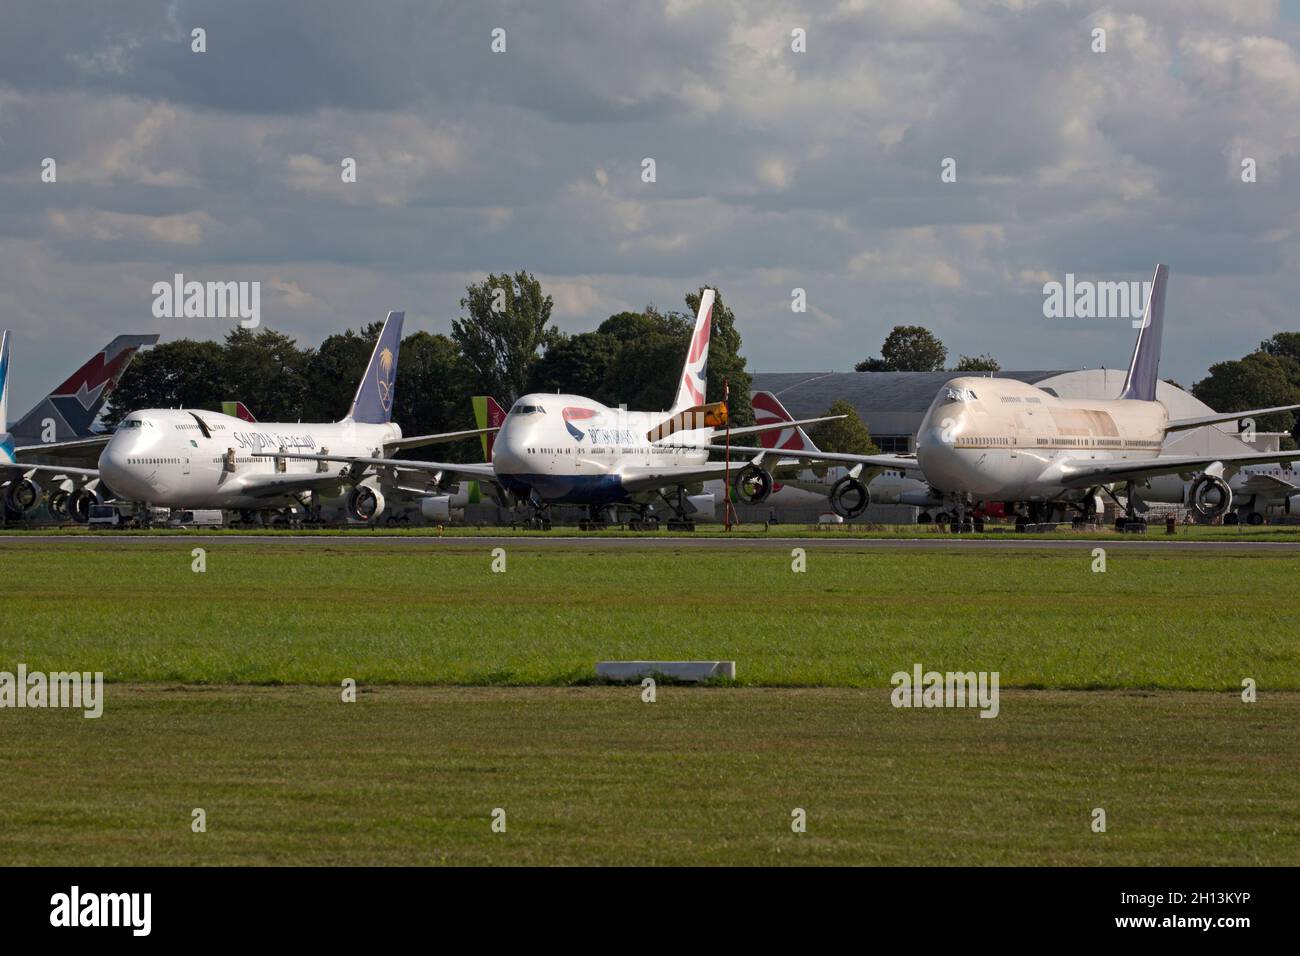 A row of Boeing 747 airliners at Cotswold Airport in England, waiting to be scrapped. Stock Photo